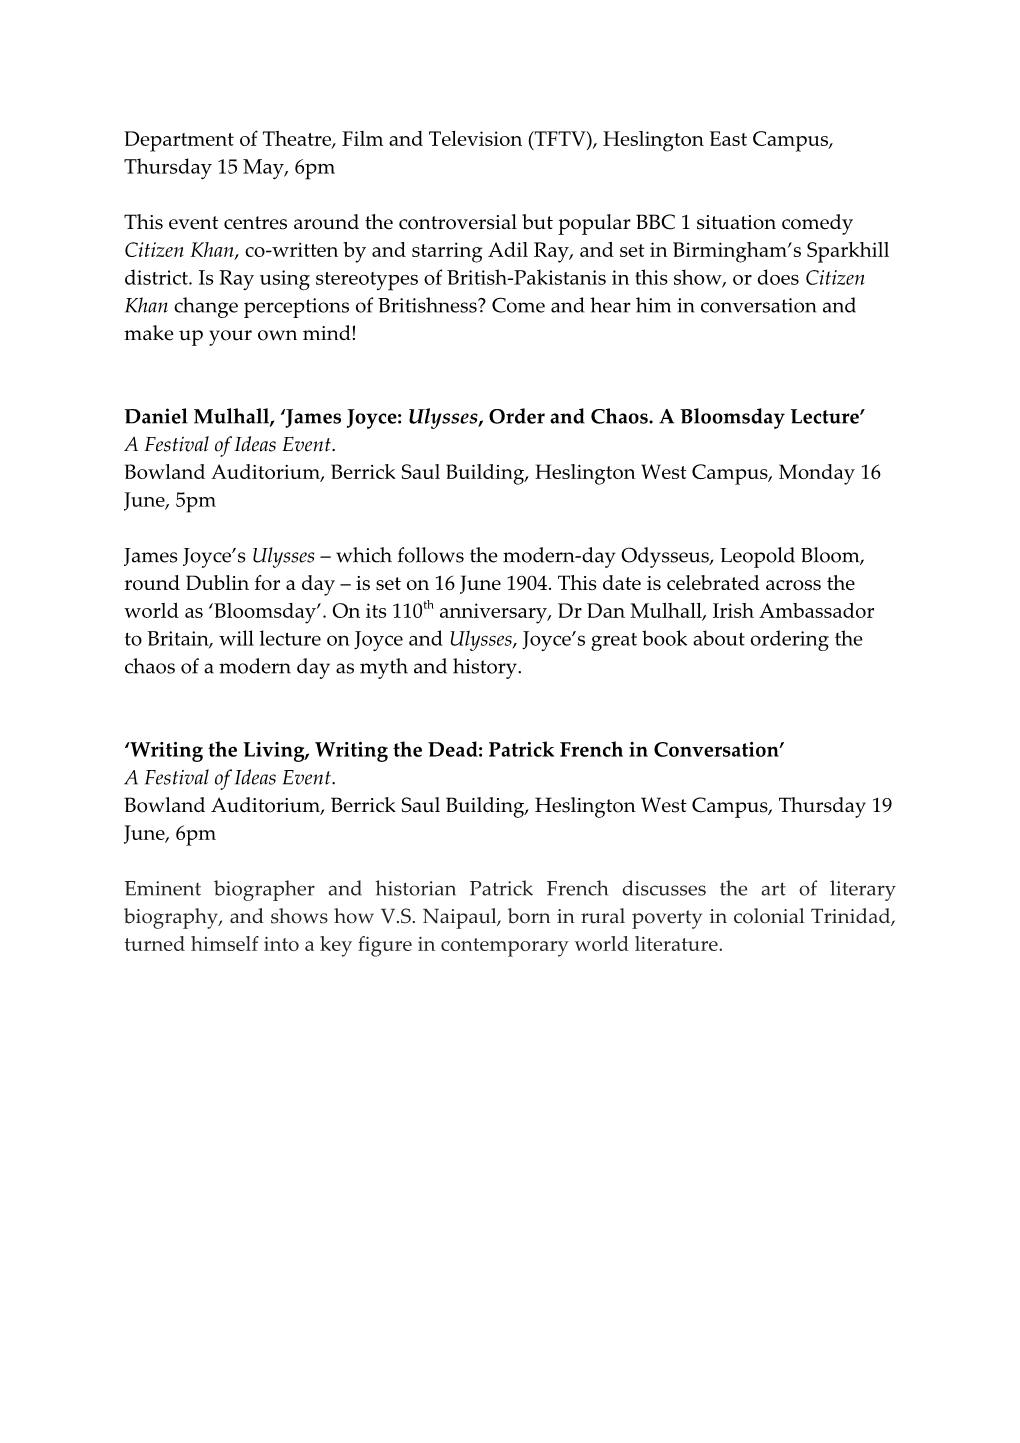 Writers at York: Programme for Spring Summer 2014